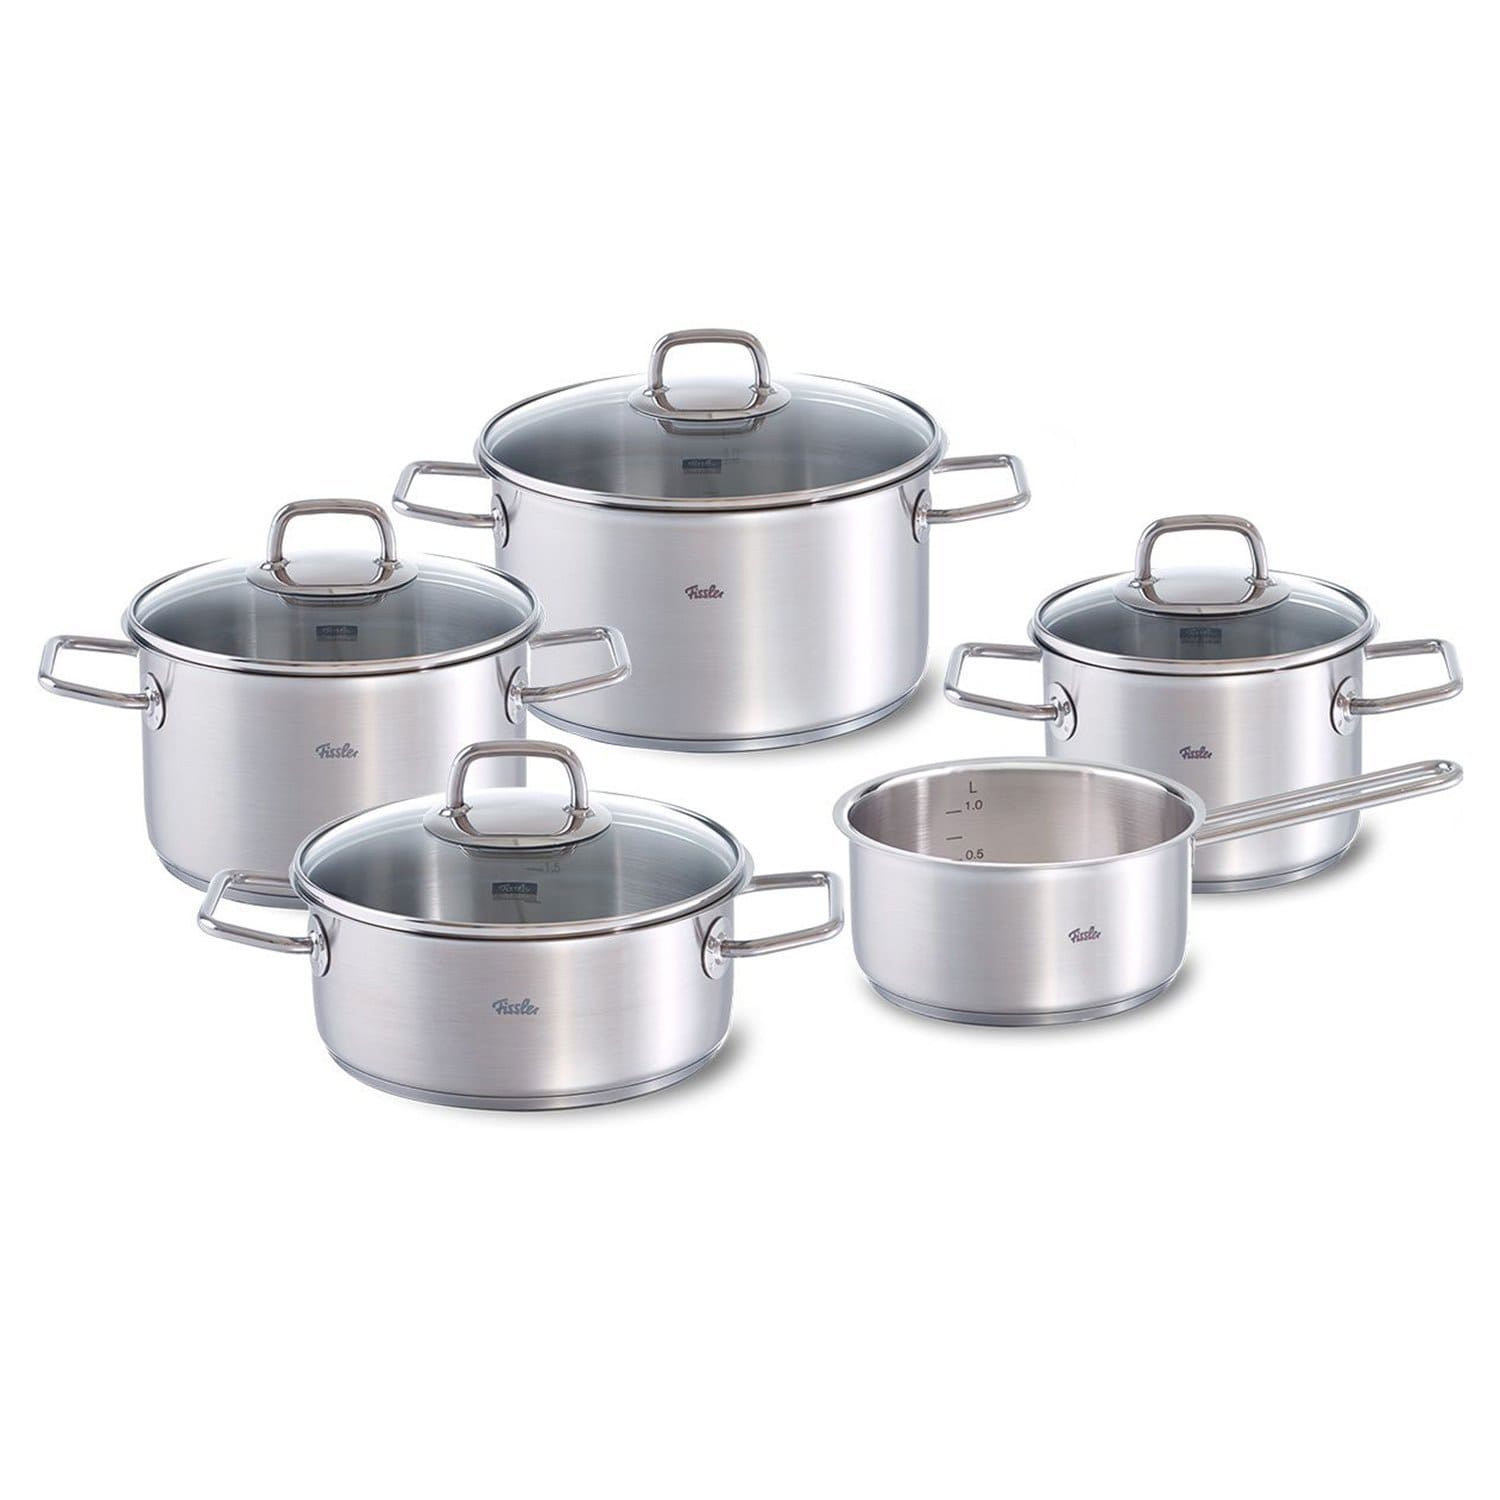 Fissler Viseo 9 Piece Cookware Set - Silver and Clear - 084-117-05-000/0 - Jashanmal Home